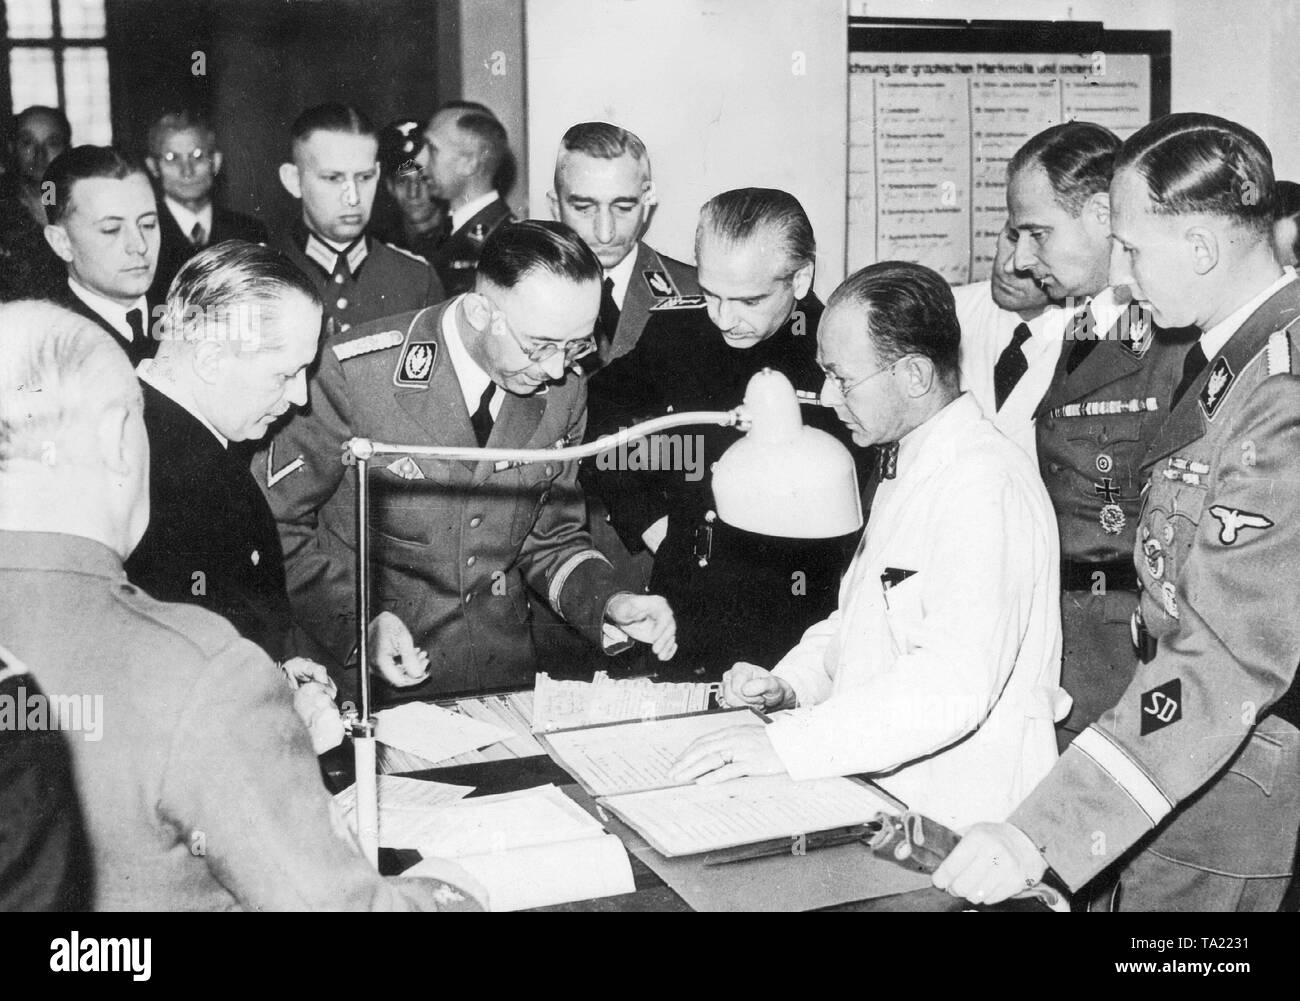 Reichsfuehrer-SS Heinrich Himmler (middle) with the Spanish Interior Minister Serrano Suner during a visit to the manuscript collection of the Reich Criminal Police Department. Also thereby front right: Reinhard Heydrich, head of the Security Service (SD), Karl Wolff, Chief of Personal Staff to the Reichsfuehrer, next to Himmler on the right, the Spanish Interior Minister, left behind him, Reich Criminal Director Nebe. Stock Photo